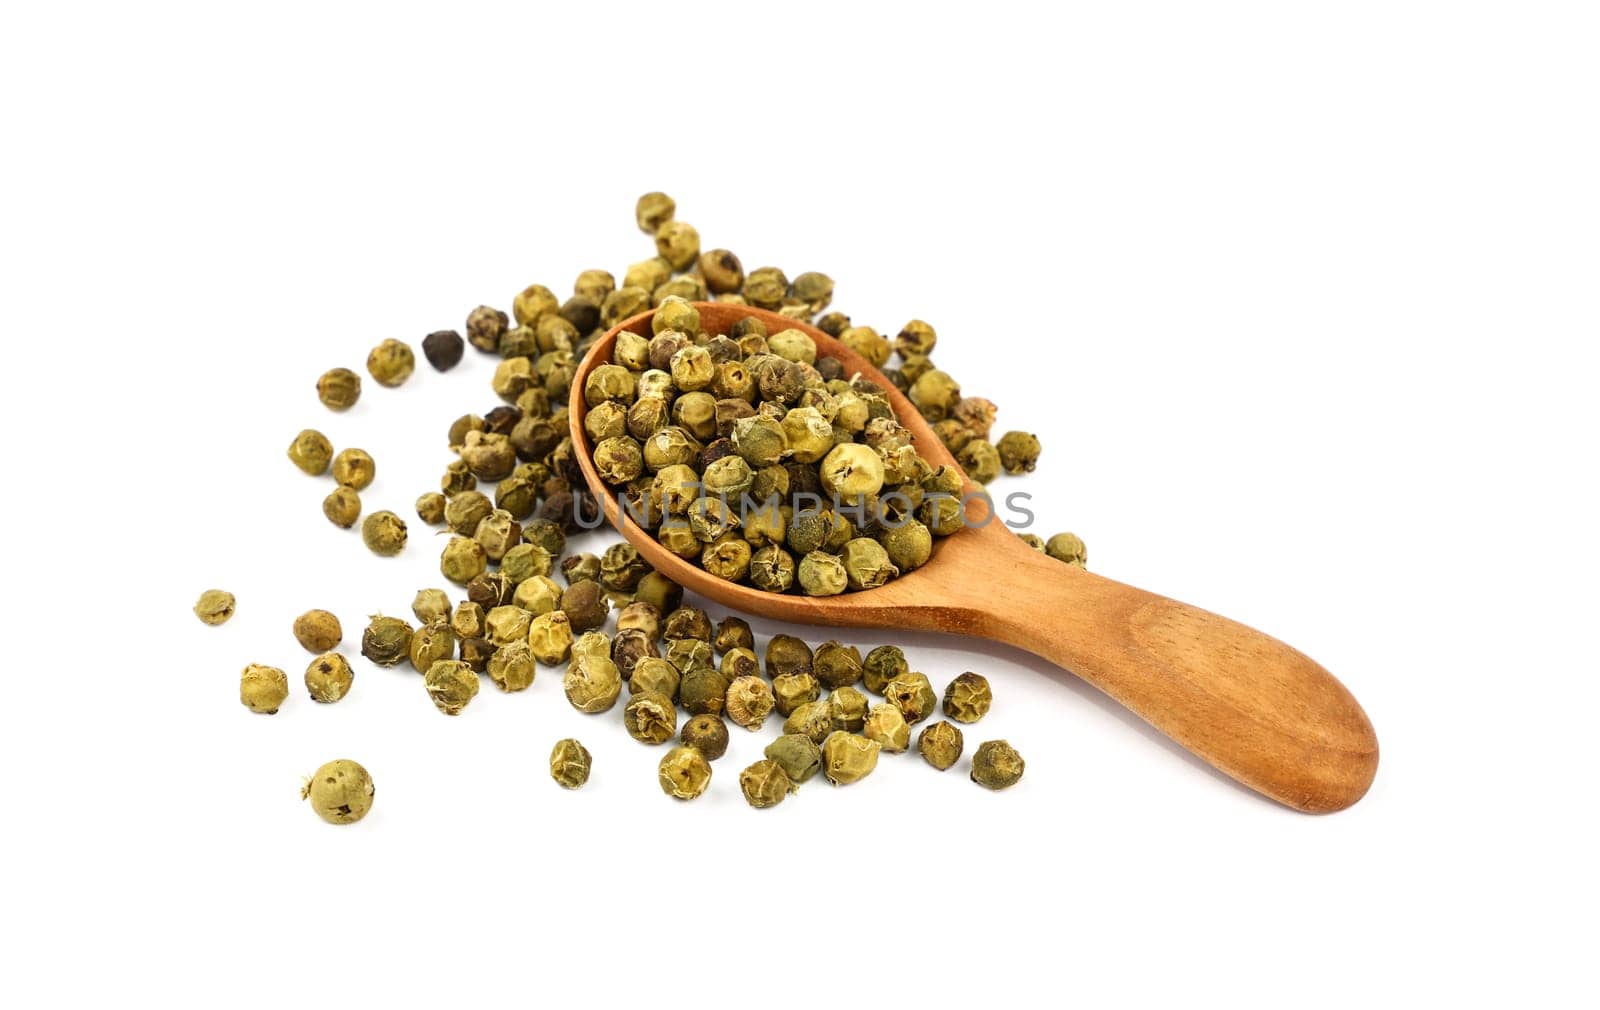 Close up one wooden scoop spoon full of green pepper peppercorns and heap of peppercorns spilled and spread around isolated on white background, high angle view